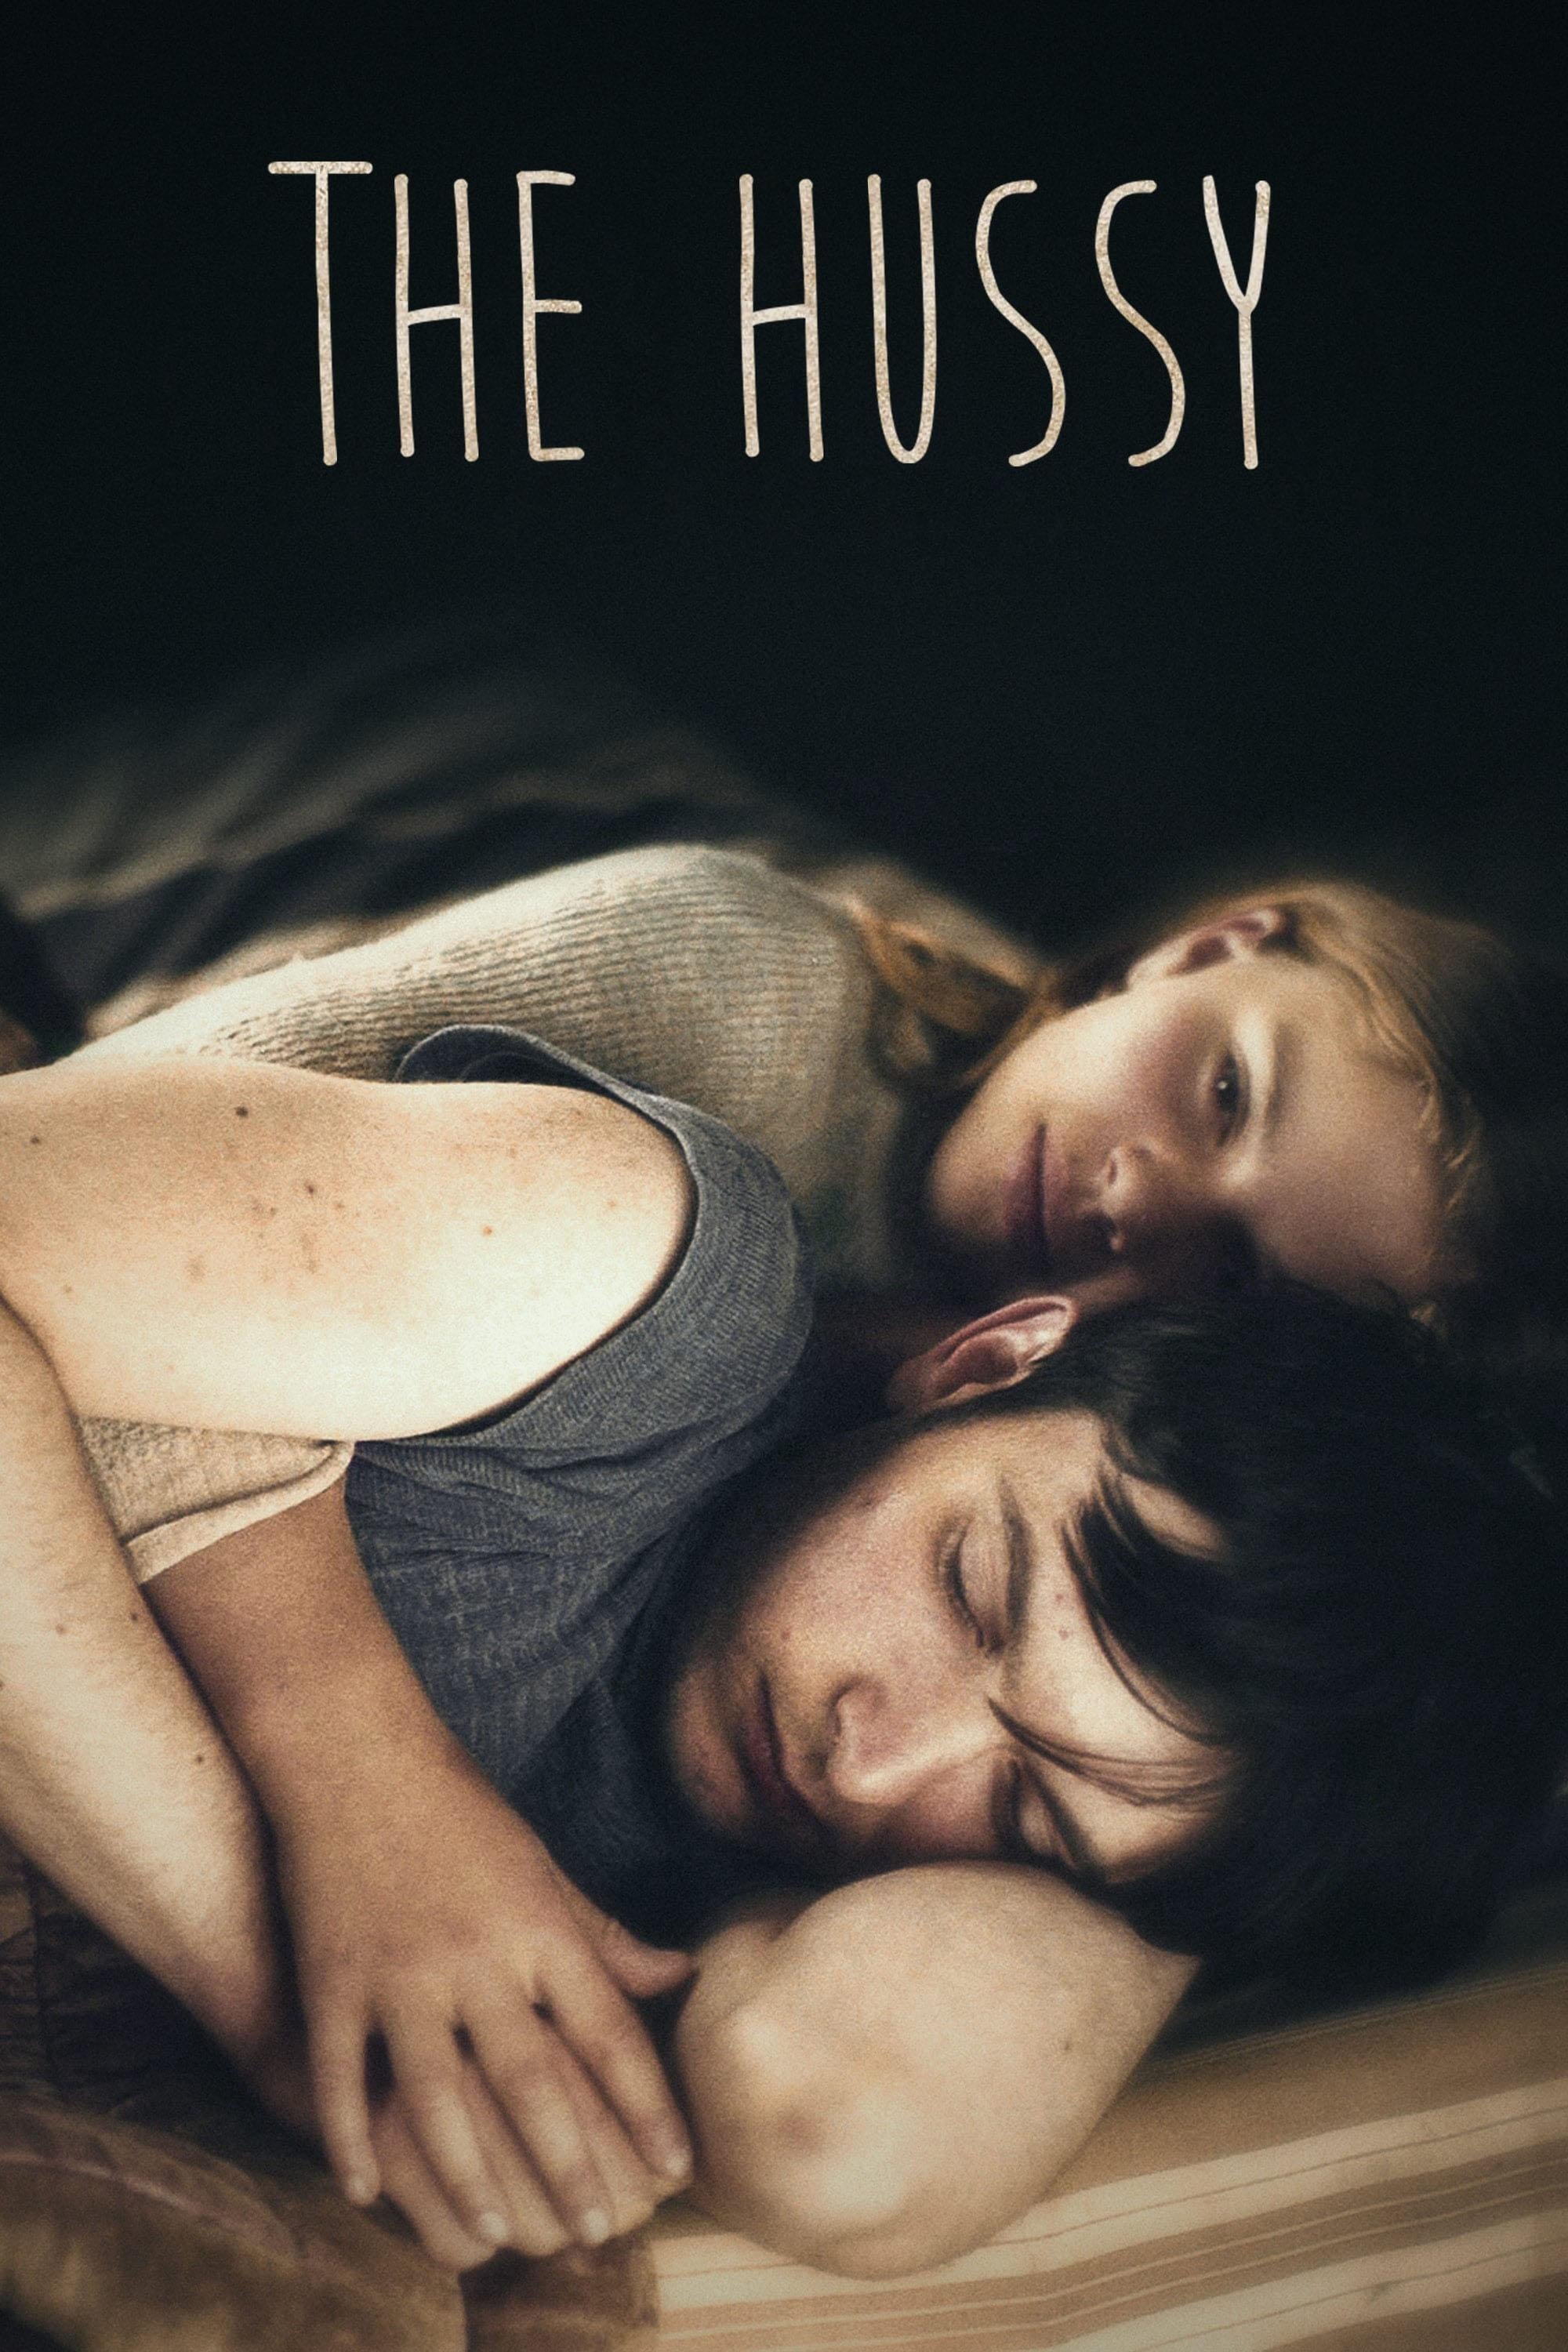 The Hussy